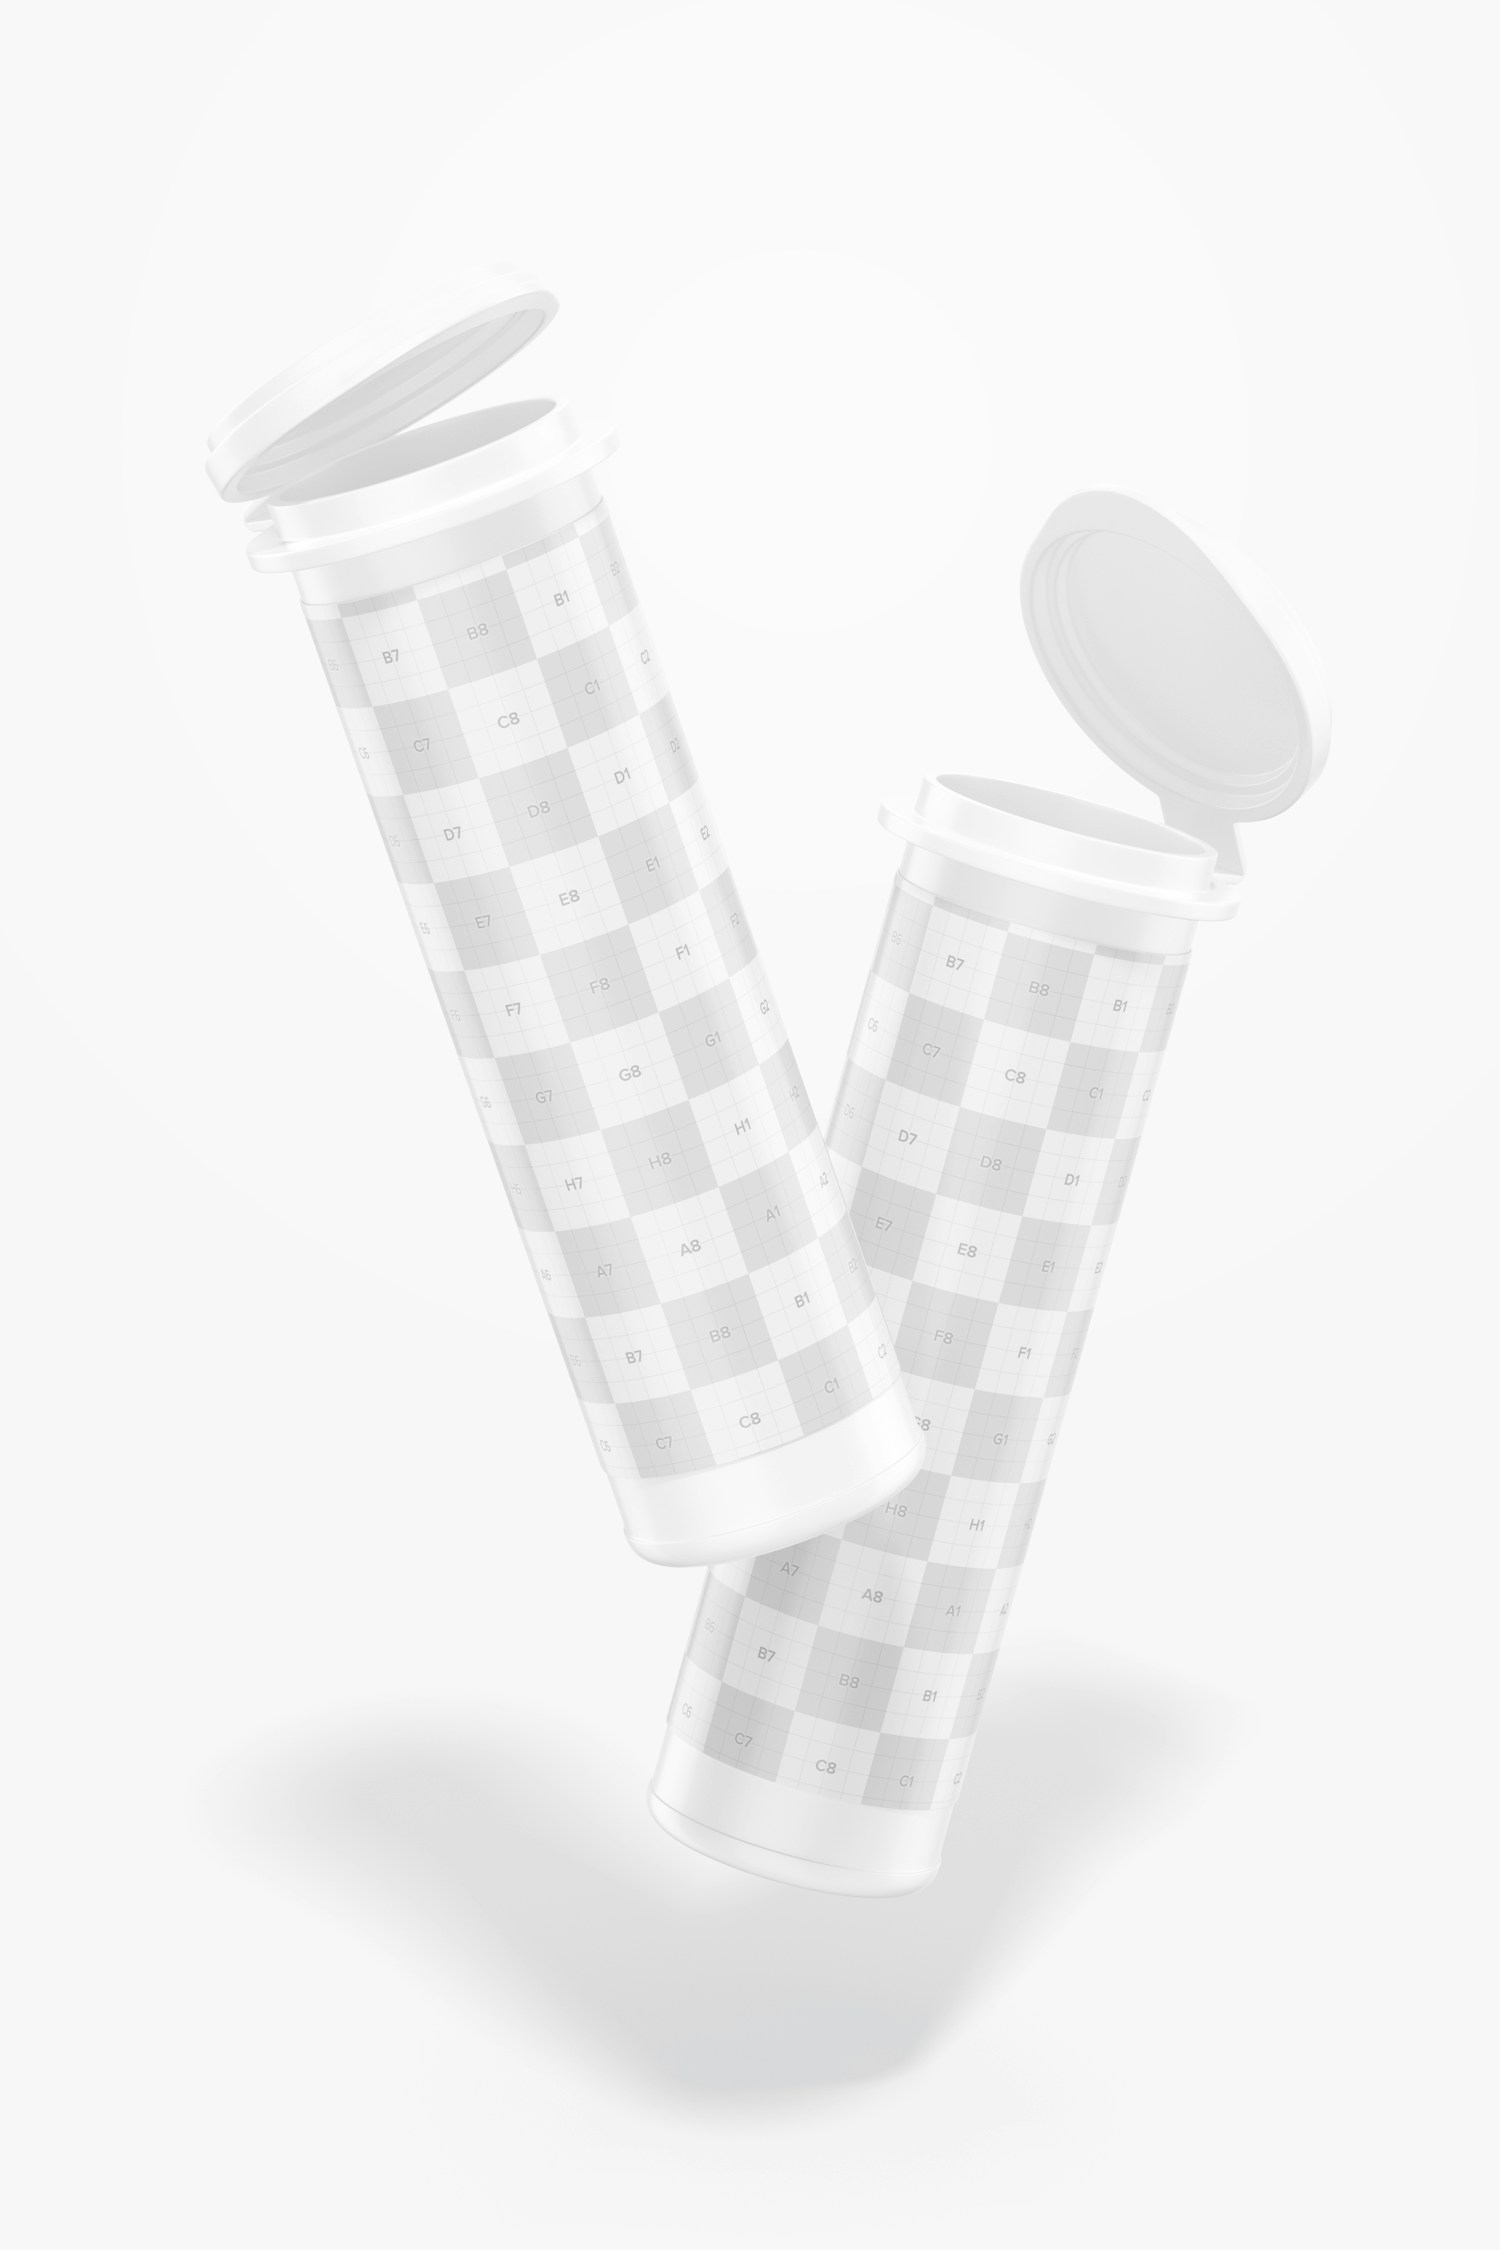 Candy Tubes with Flip Cap Mockup, Floating